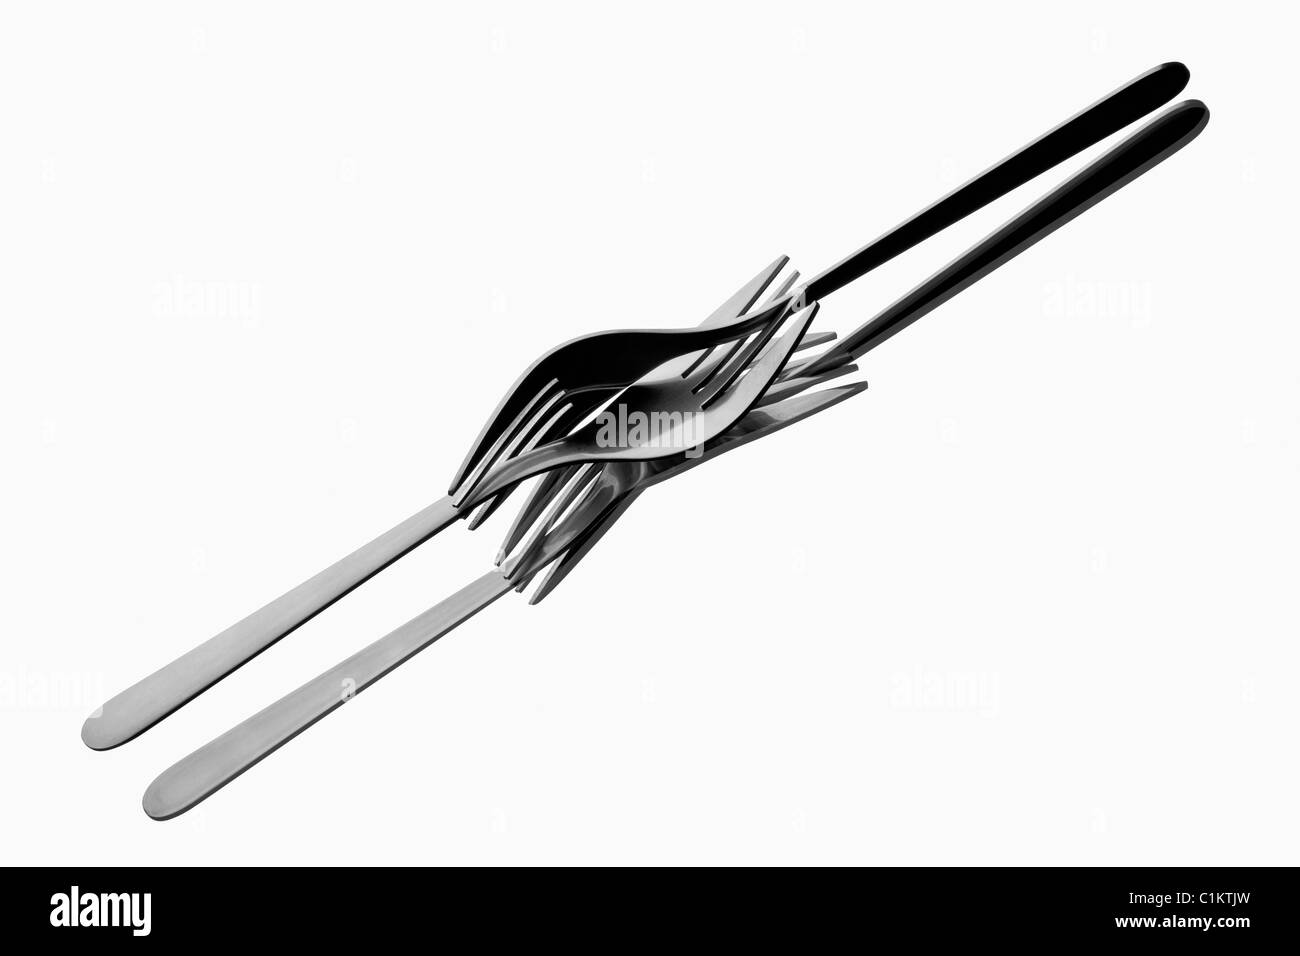 Two forks tangled up on reflecting white background Stock Photo